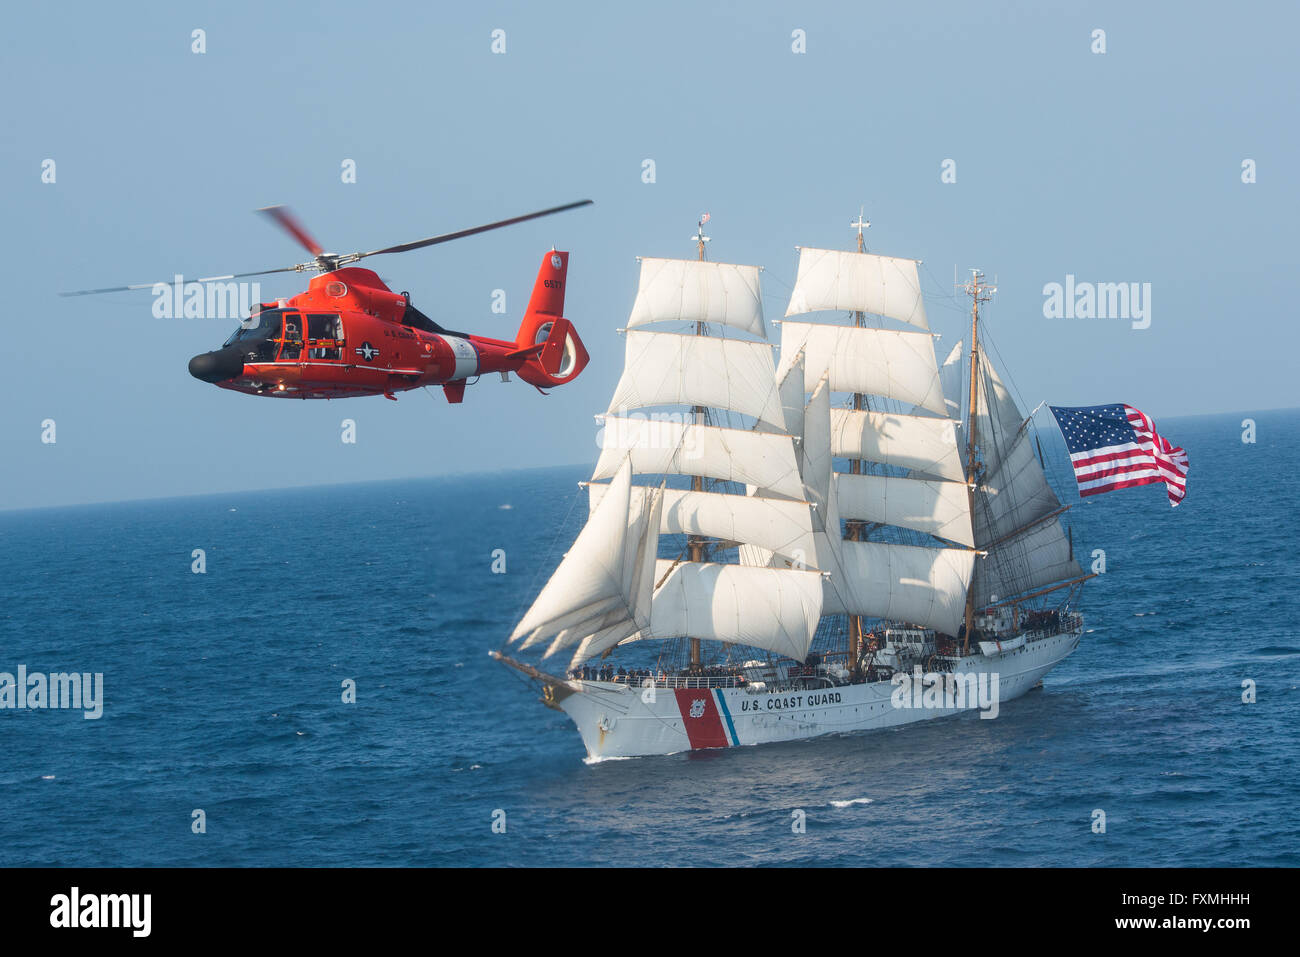 A Coast Guard MH-65 Dolphin helicopter past the Coast Guard barque Eagle with full sails July 30, 2015 in the Atlantic Ocean. The photo is a recreation of the U.S. Postal Service Forever Stamp created by William S. Phillips, an aviation artist. Stock Photo